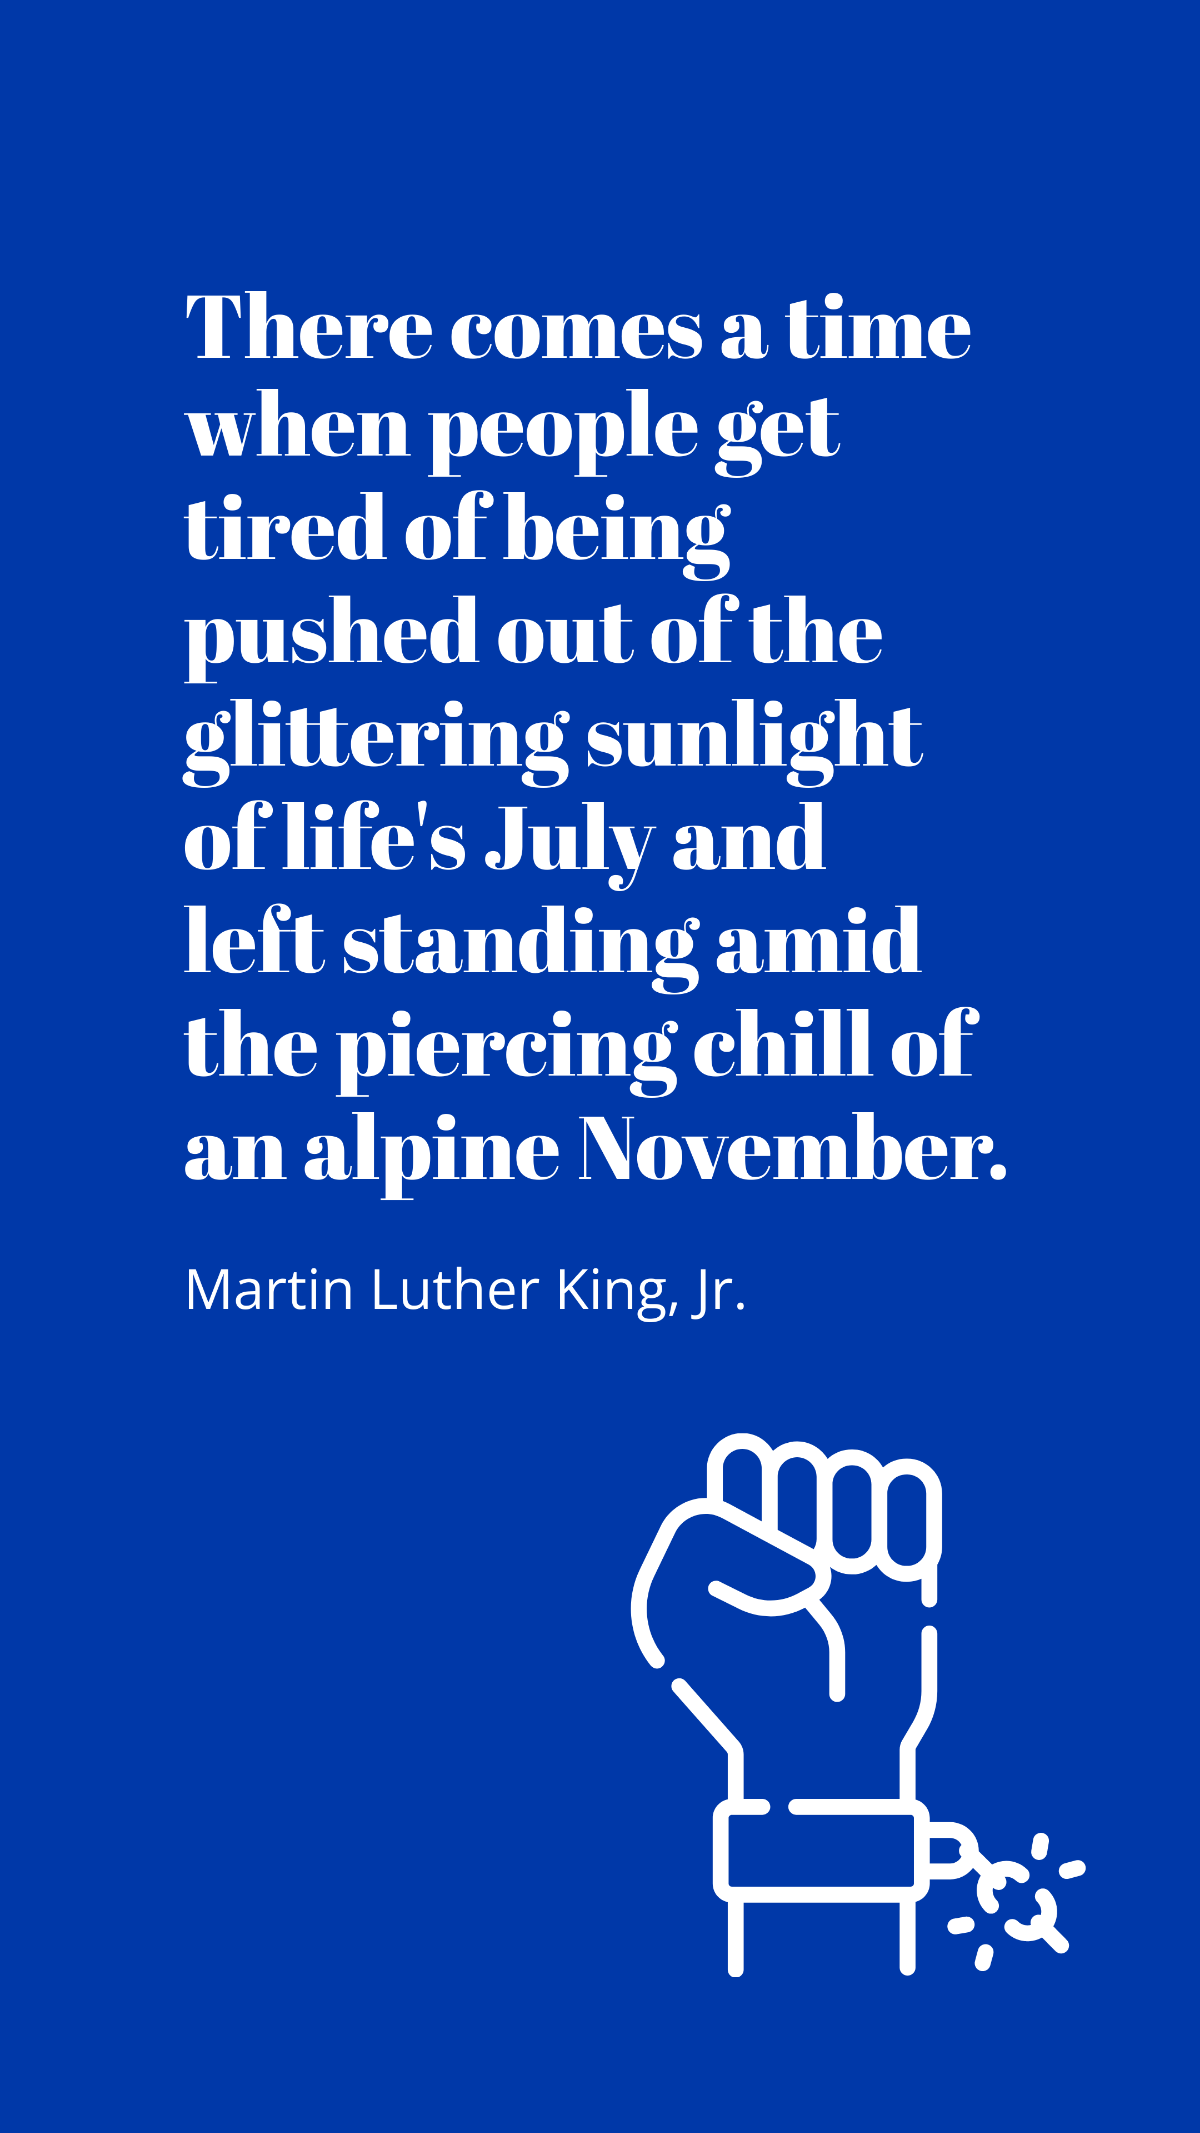 Free Martin Luther King, Jr. - There comes a time when people get tired of being pushed out of the glittering sunlight of life's July and left standing amid the piercing chill of an alpine November. Templa